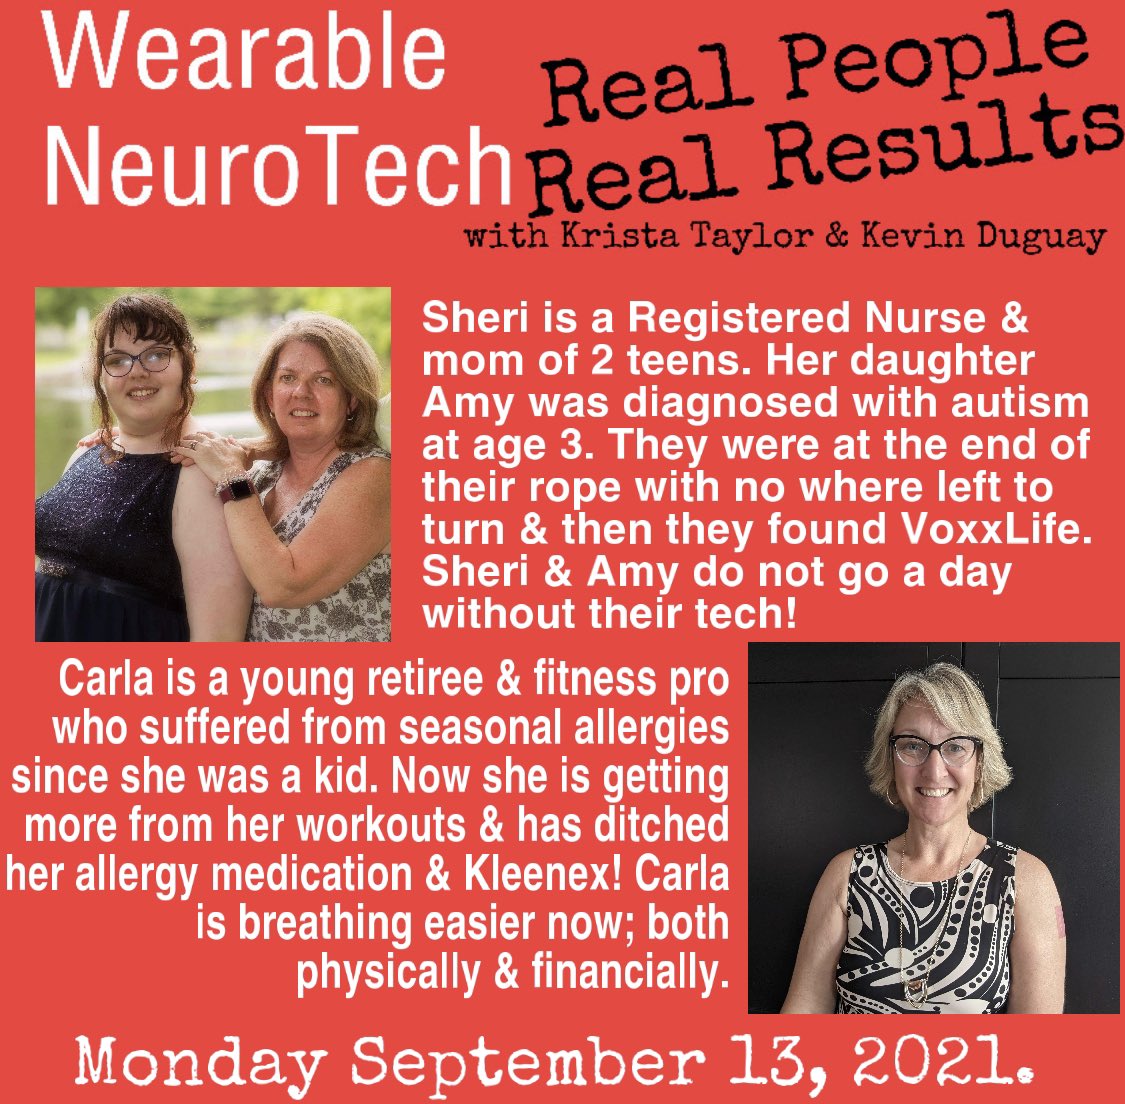 Real People Real Results Sept 13, 2021 youtu.be/5vDubrf_19I via @YouTube #AutismAwareness #autistic #teen #highschool #fitness #personaltrainer #golf #allergies #voxxlife #testimonial #testimonials #wearableneurotech #KristaTaylor #RealPeopleRealResults #interview #autism